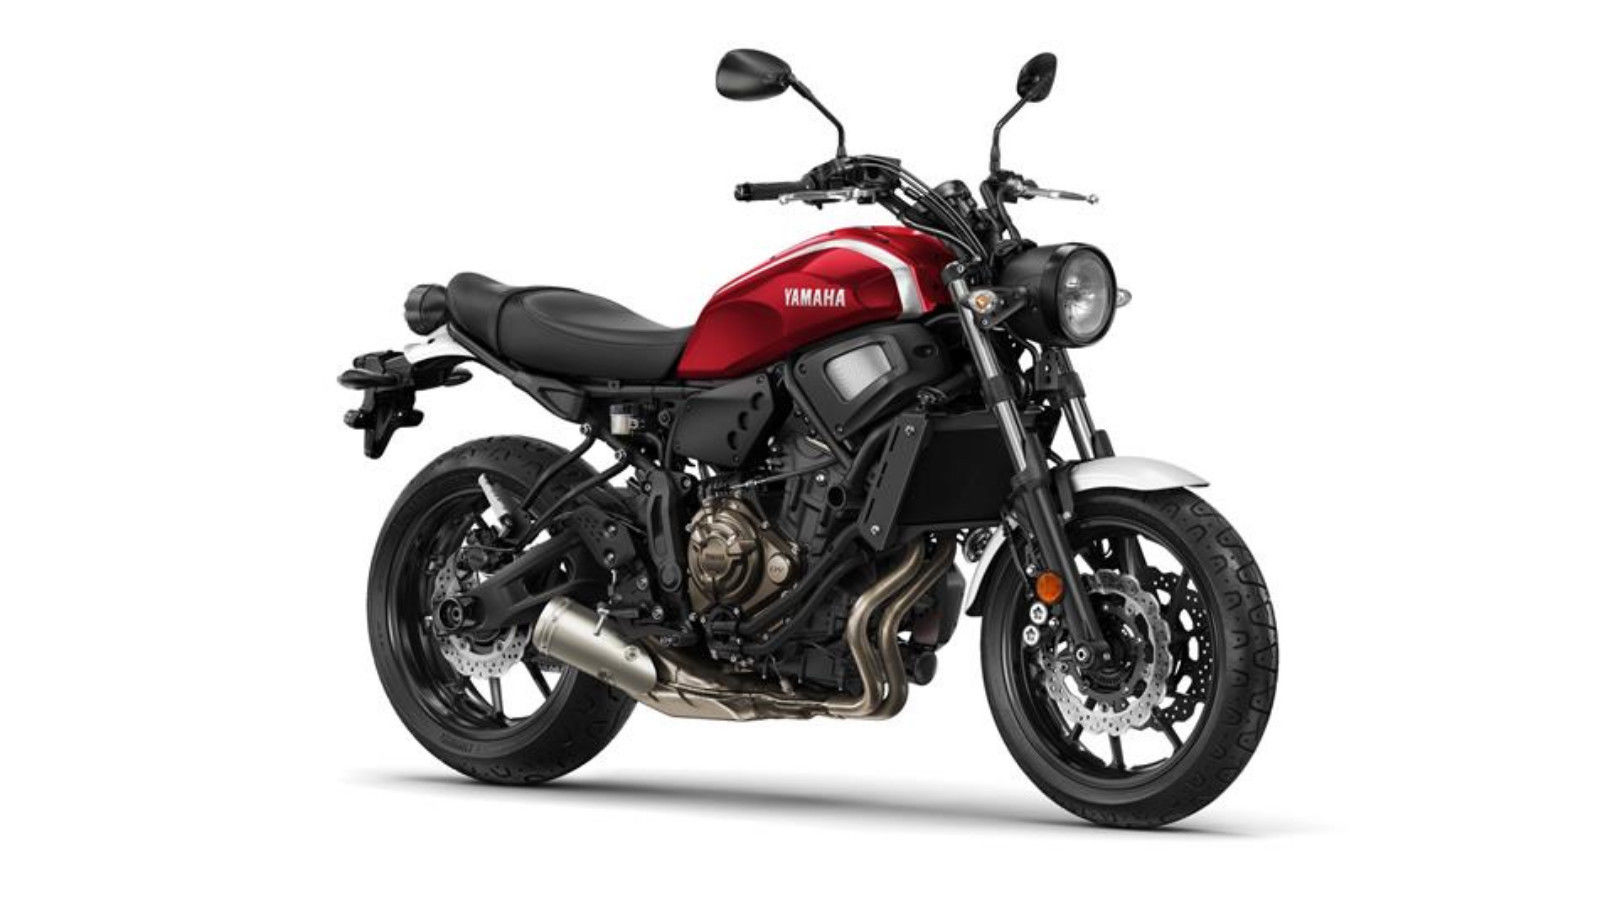 XSR700 ABS Modell 2018 BRILLIANT RED SOFORT!